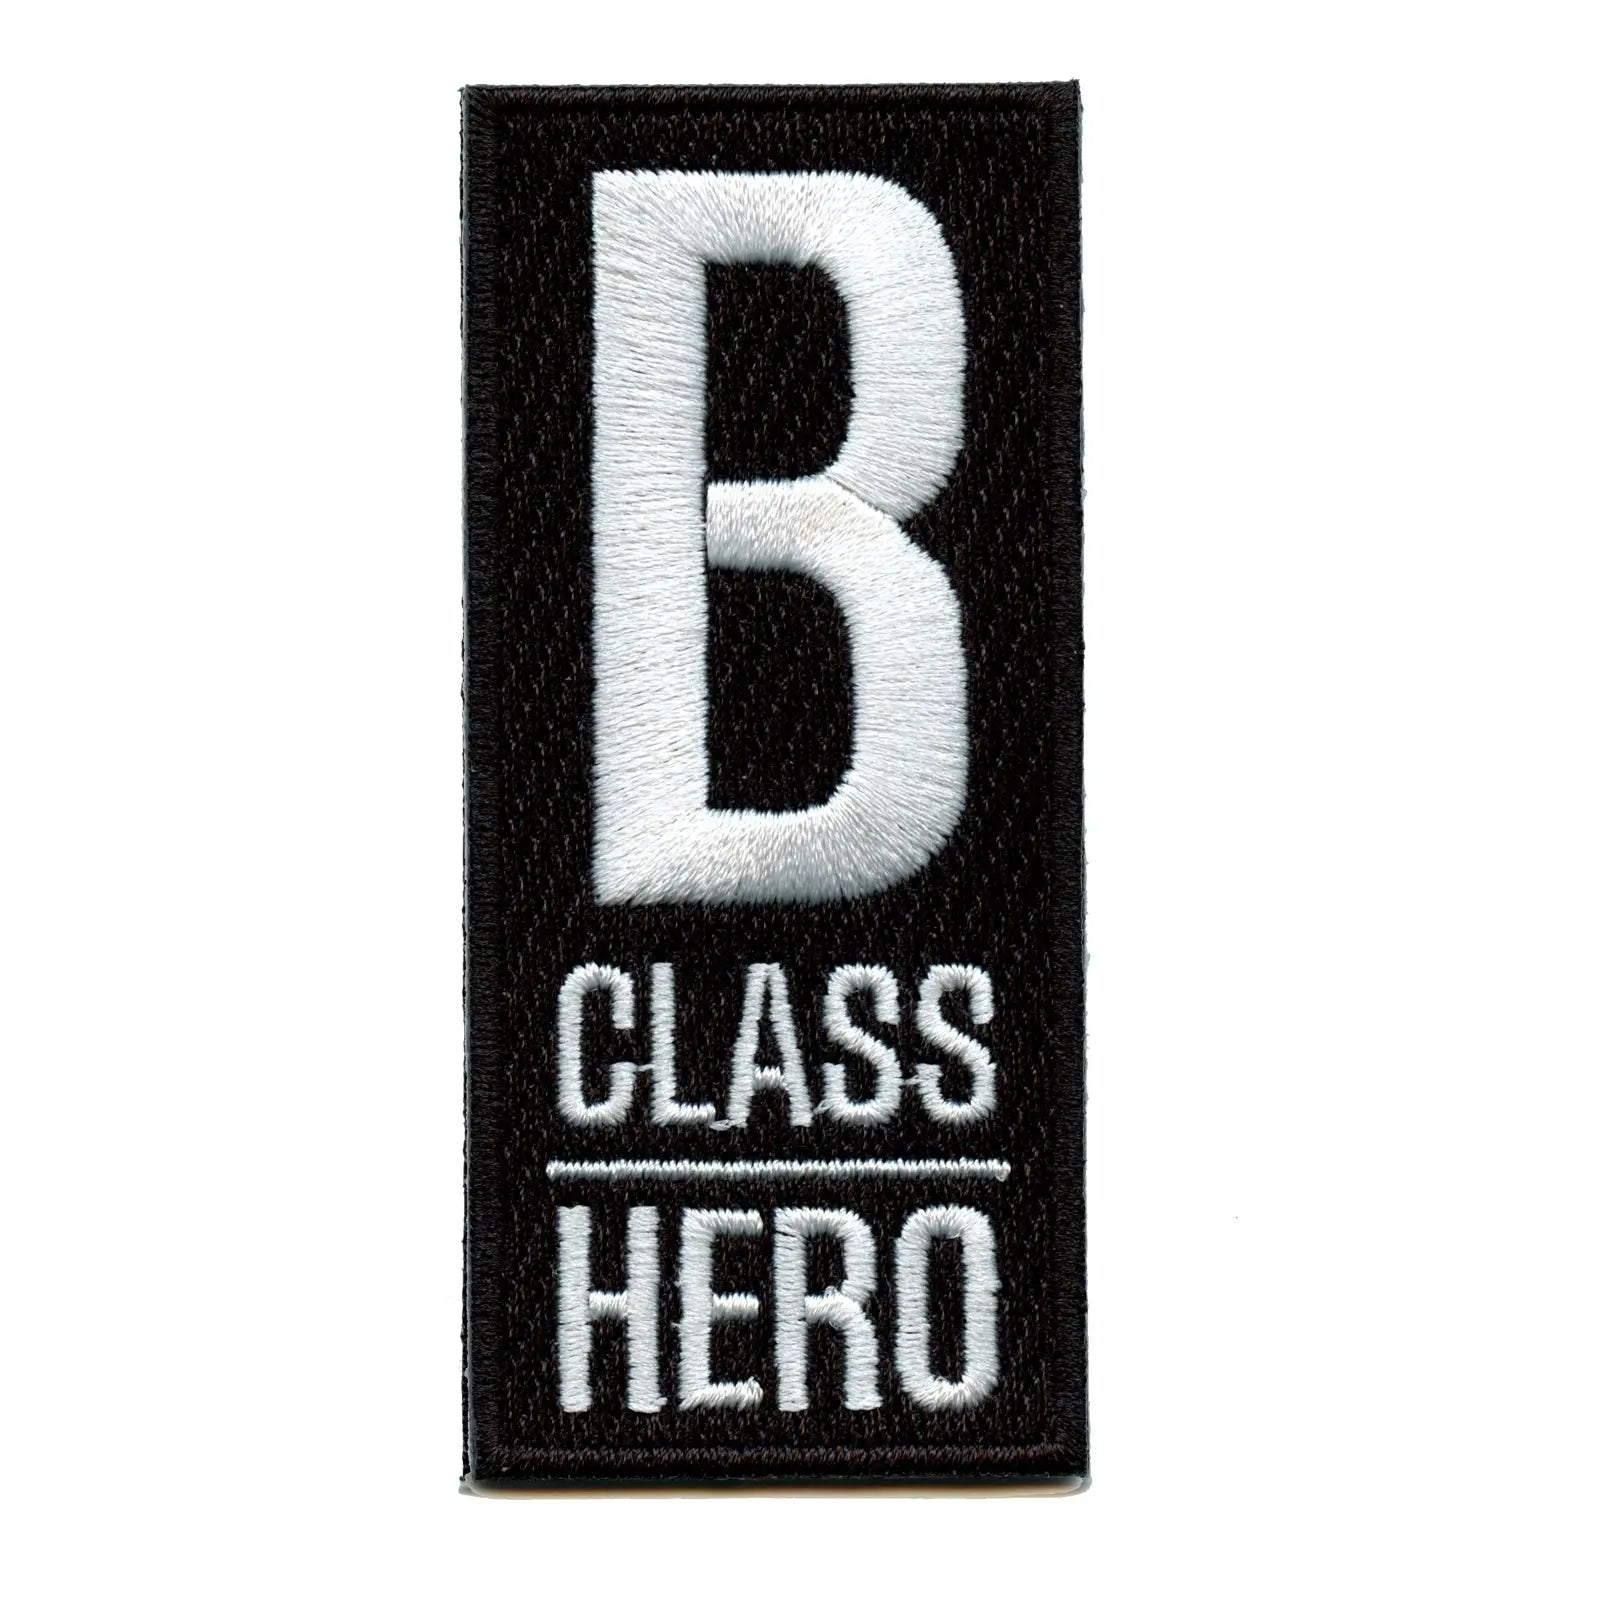 One Punch Man Anime B-Class Hero Embroidered Iron On Patch 